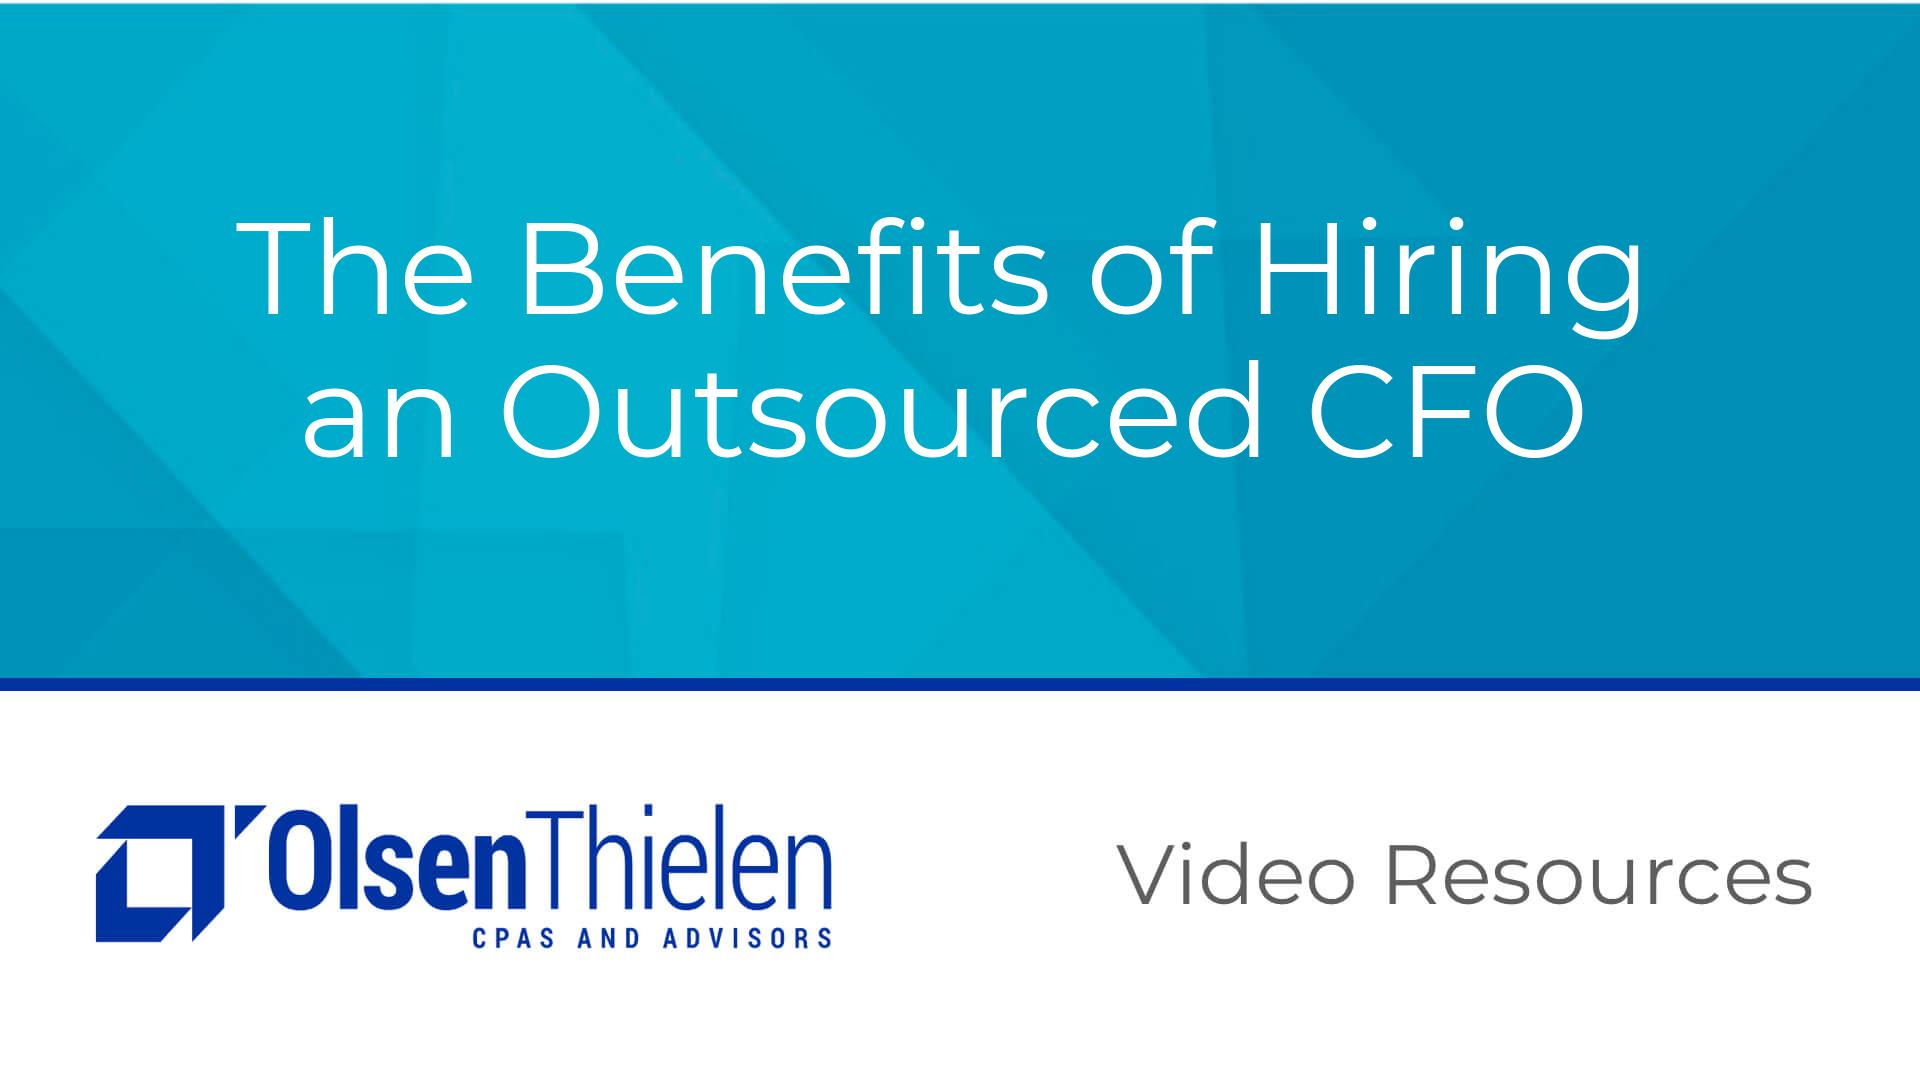 The Benefits of Hiring an Outsourced CFO